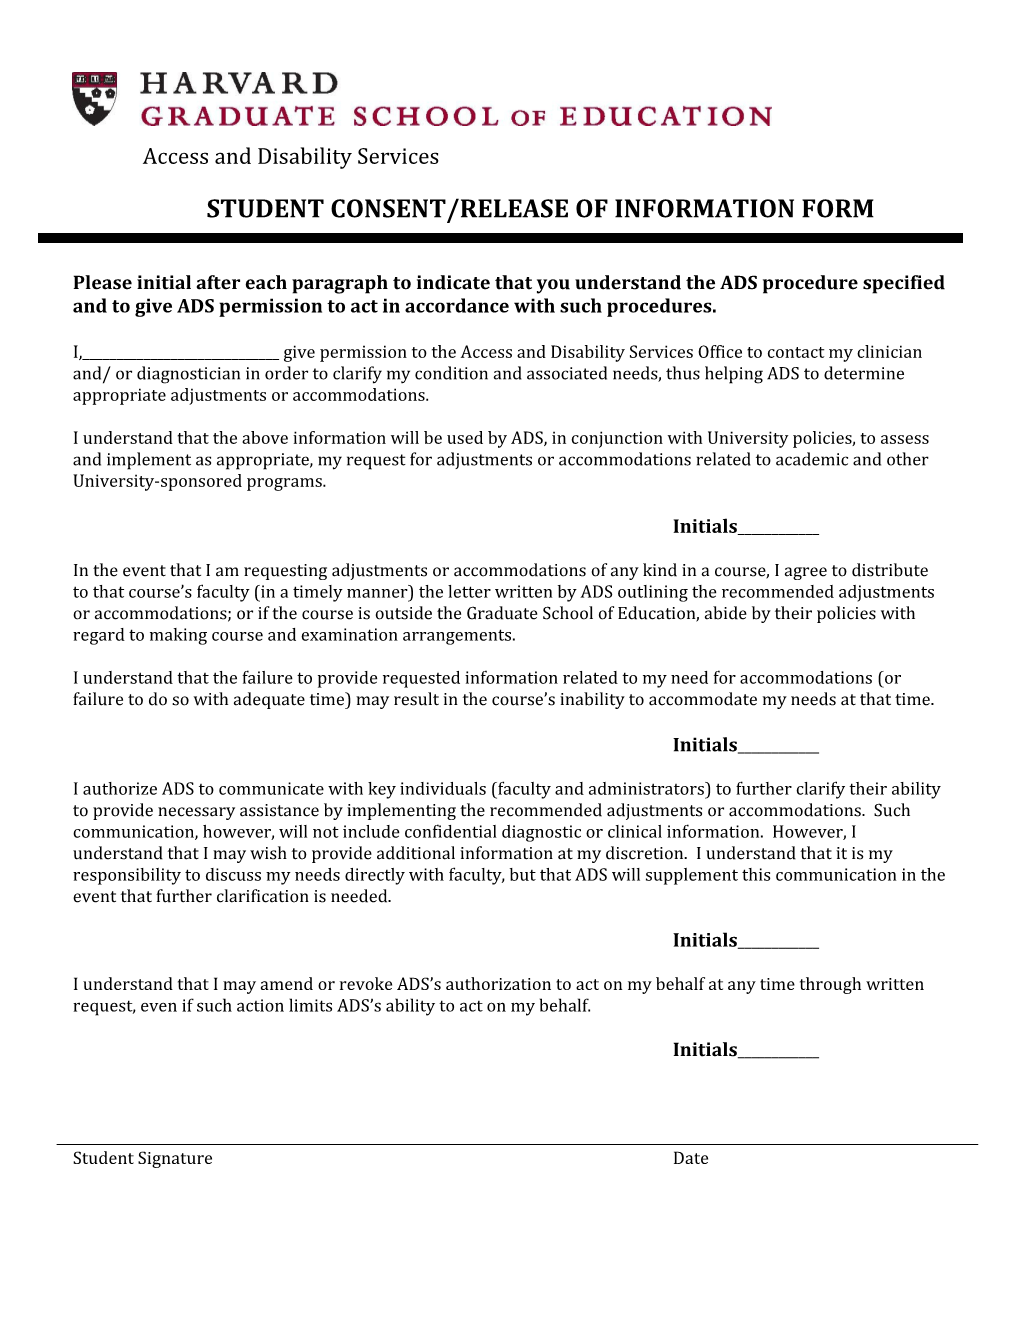 Student Consent/Release of Information Form